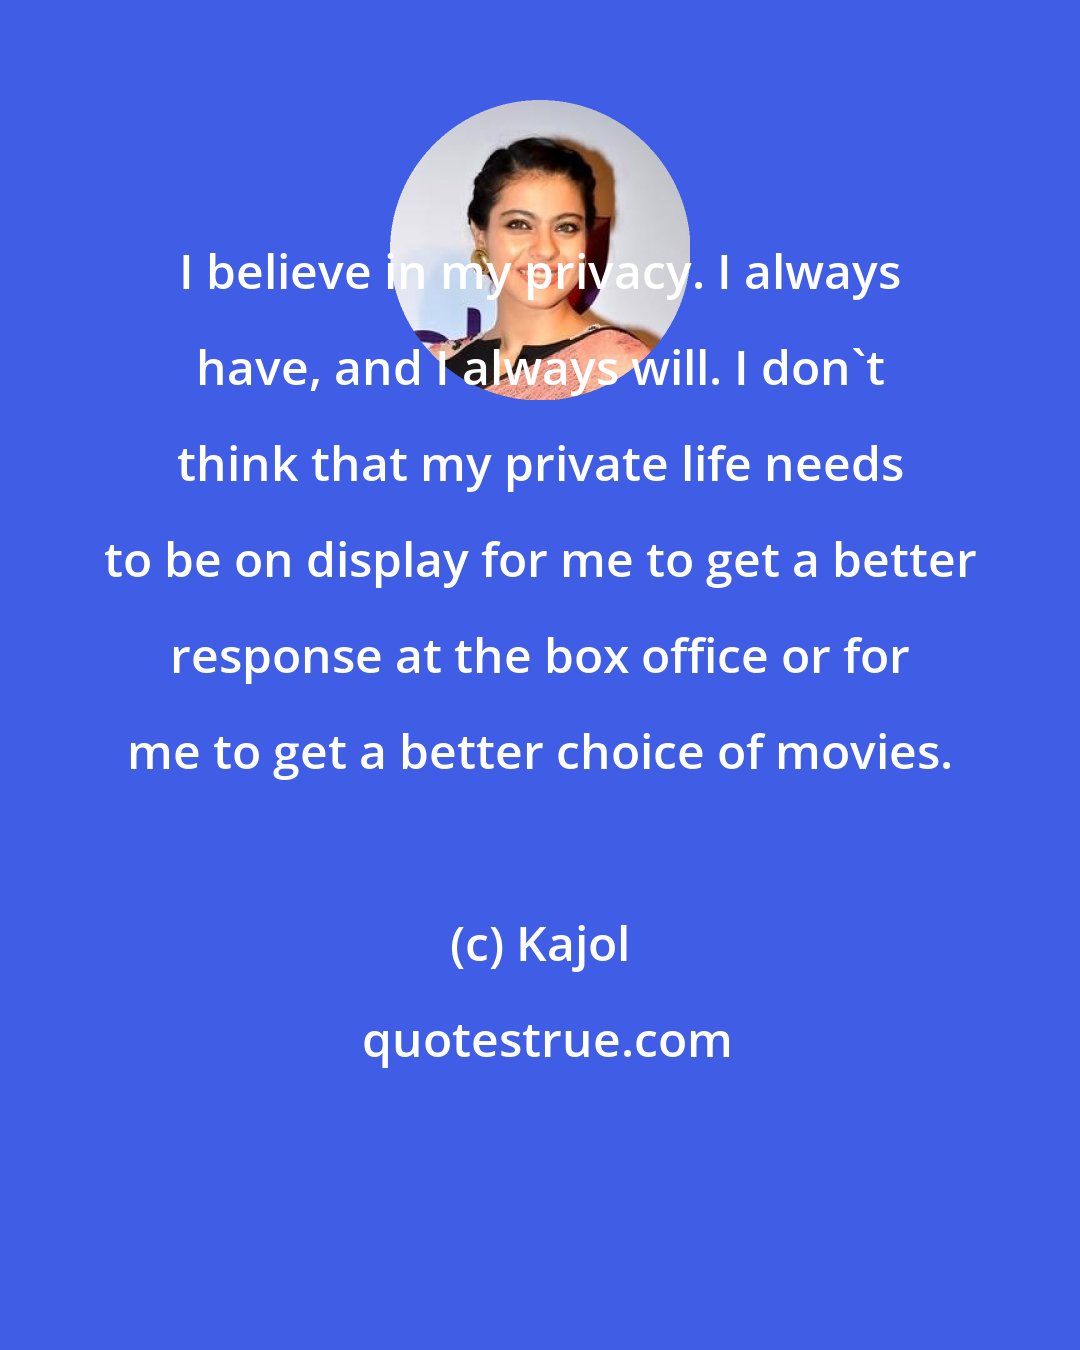 Kajol: I believe in my privacy. I always have, and I always will. I don't think that my private life needs to be on display for me to get a better response at the box office or for me to get a better choice of movies.